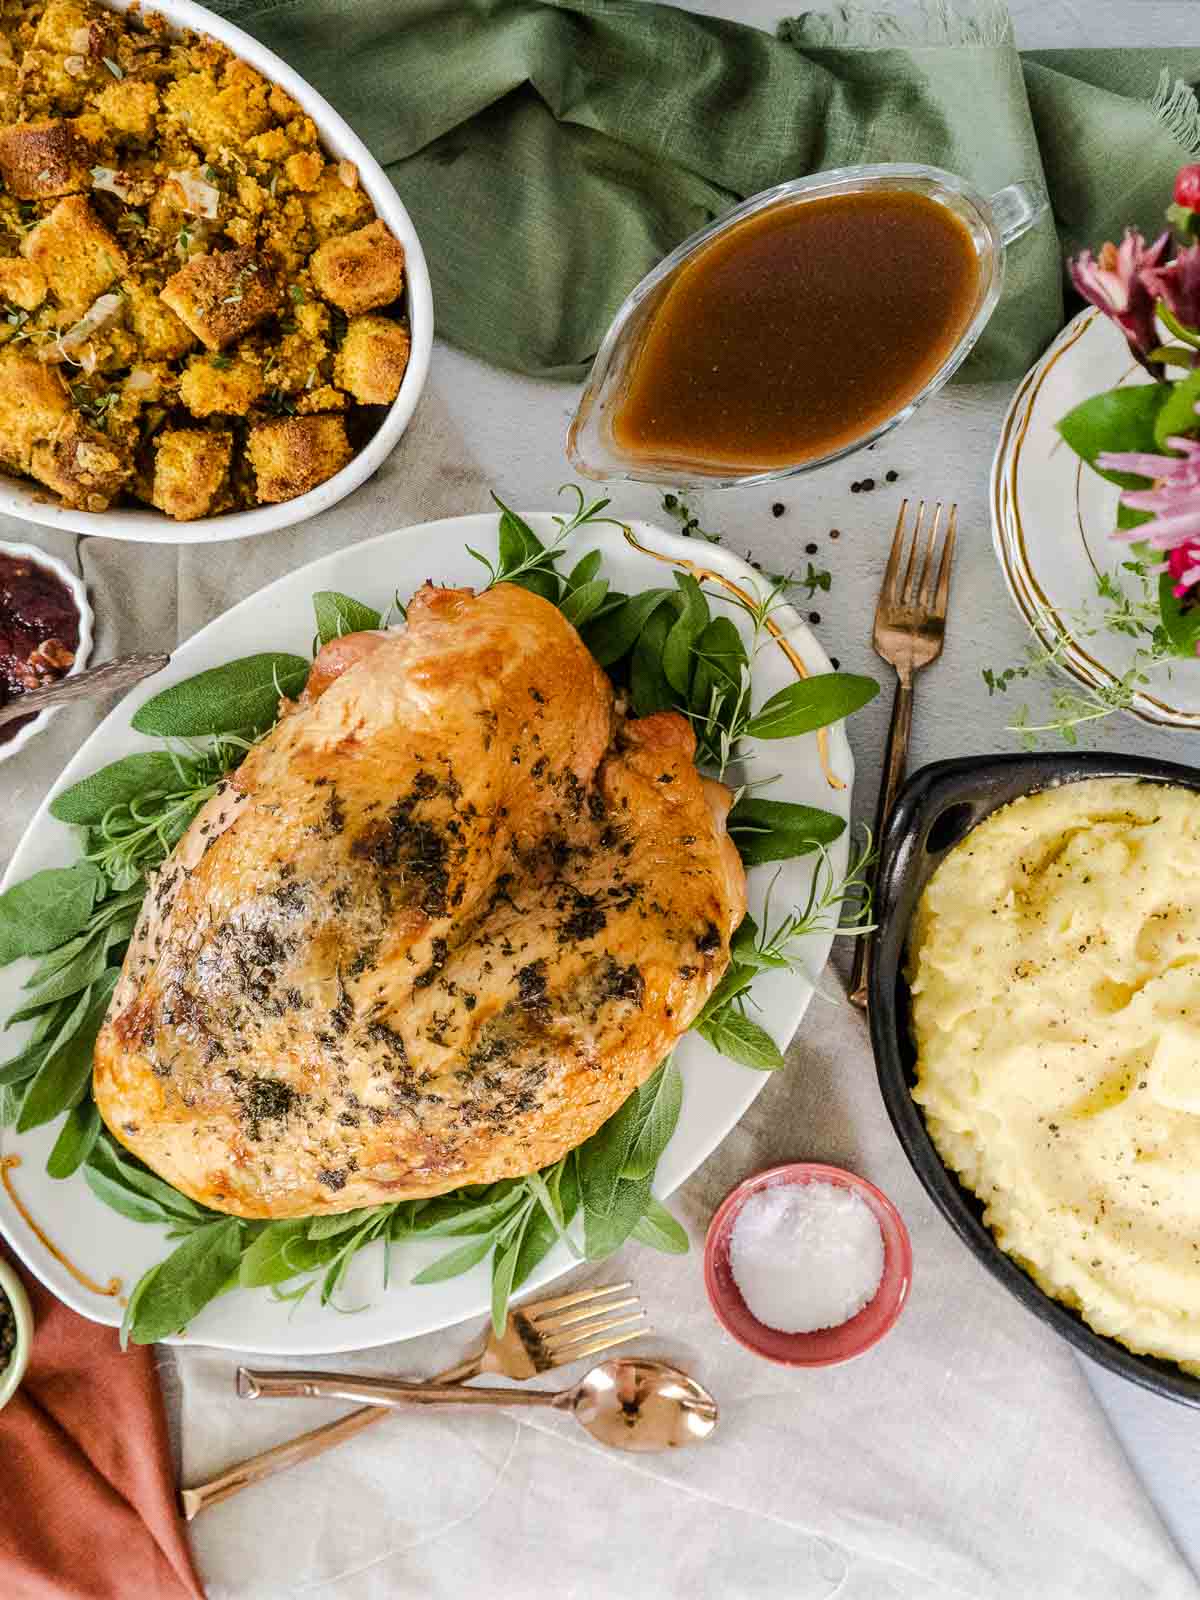 A Traditional Easy Thanksgiving Dinner Menu For 4 - An Edible Mosaic™